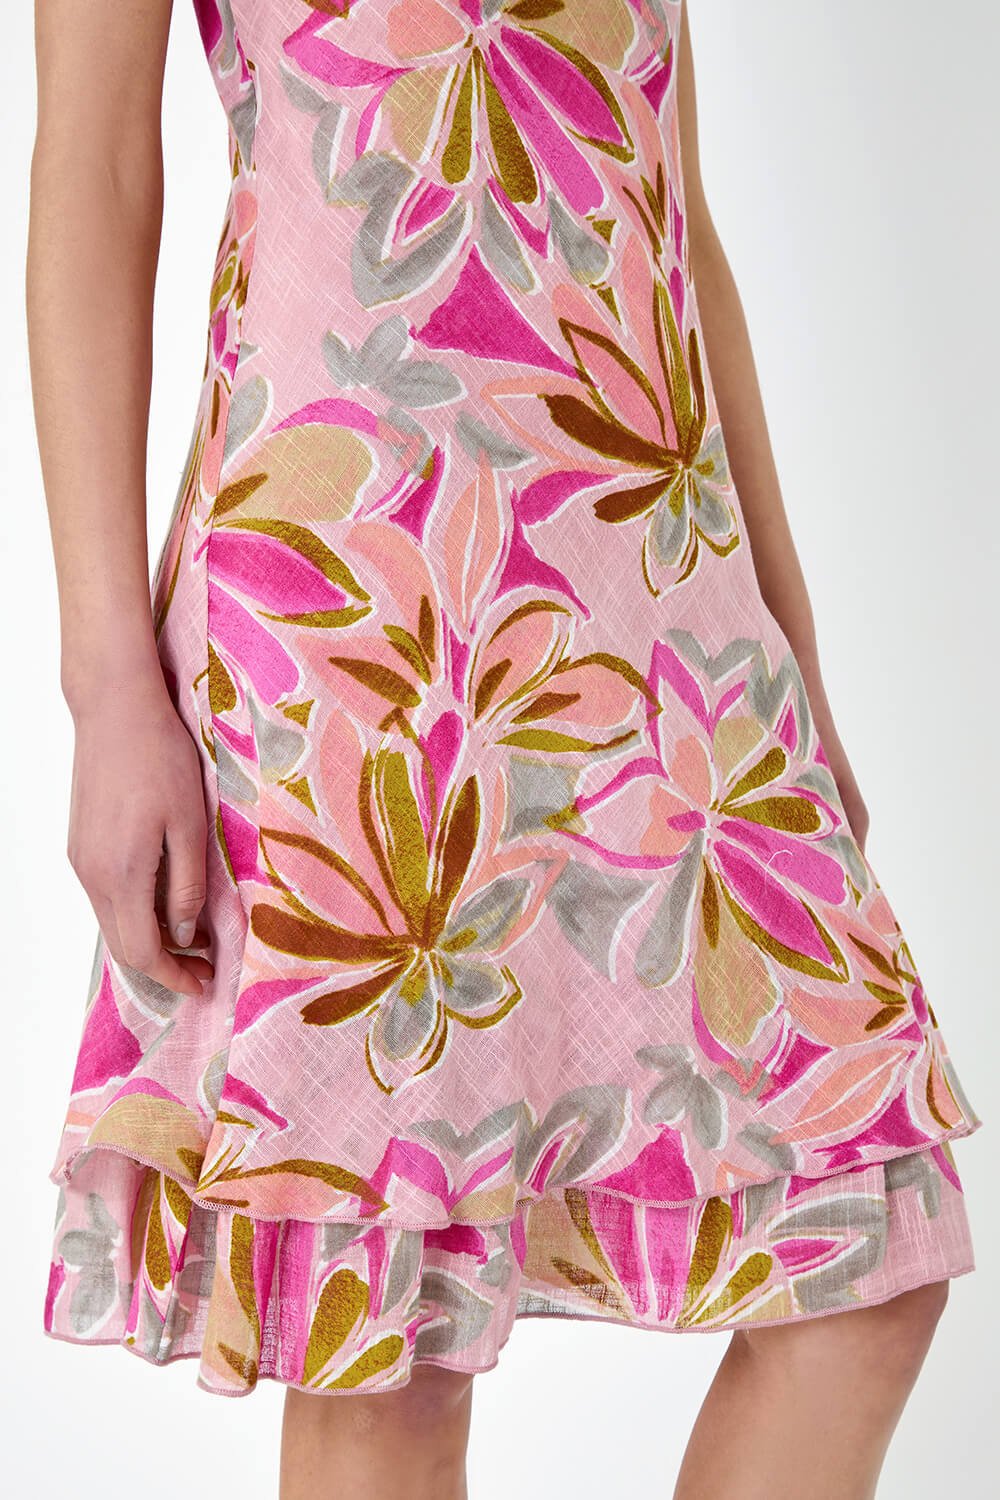 PINK Floral Print Cotton Layered Dress, Image 5 of 5